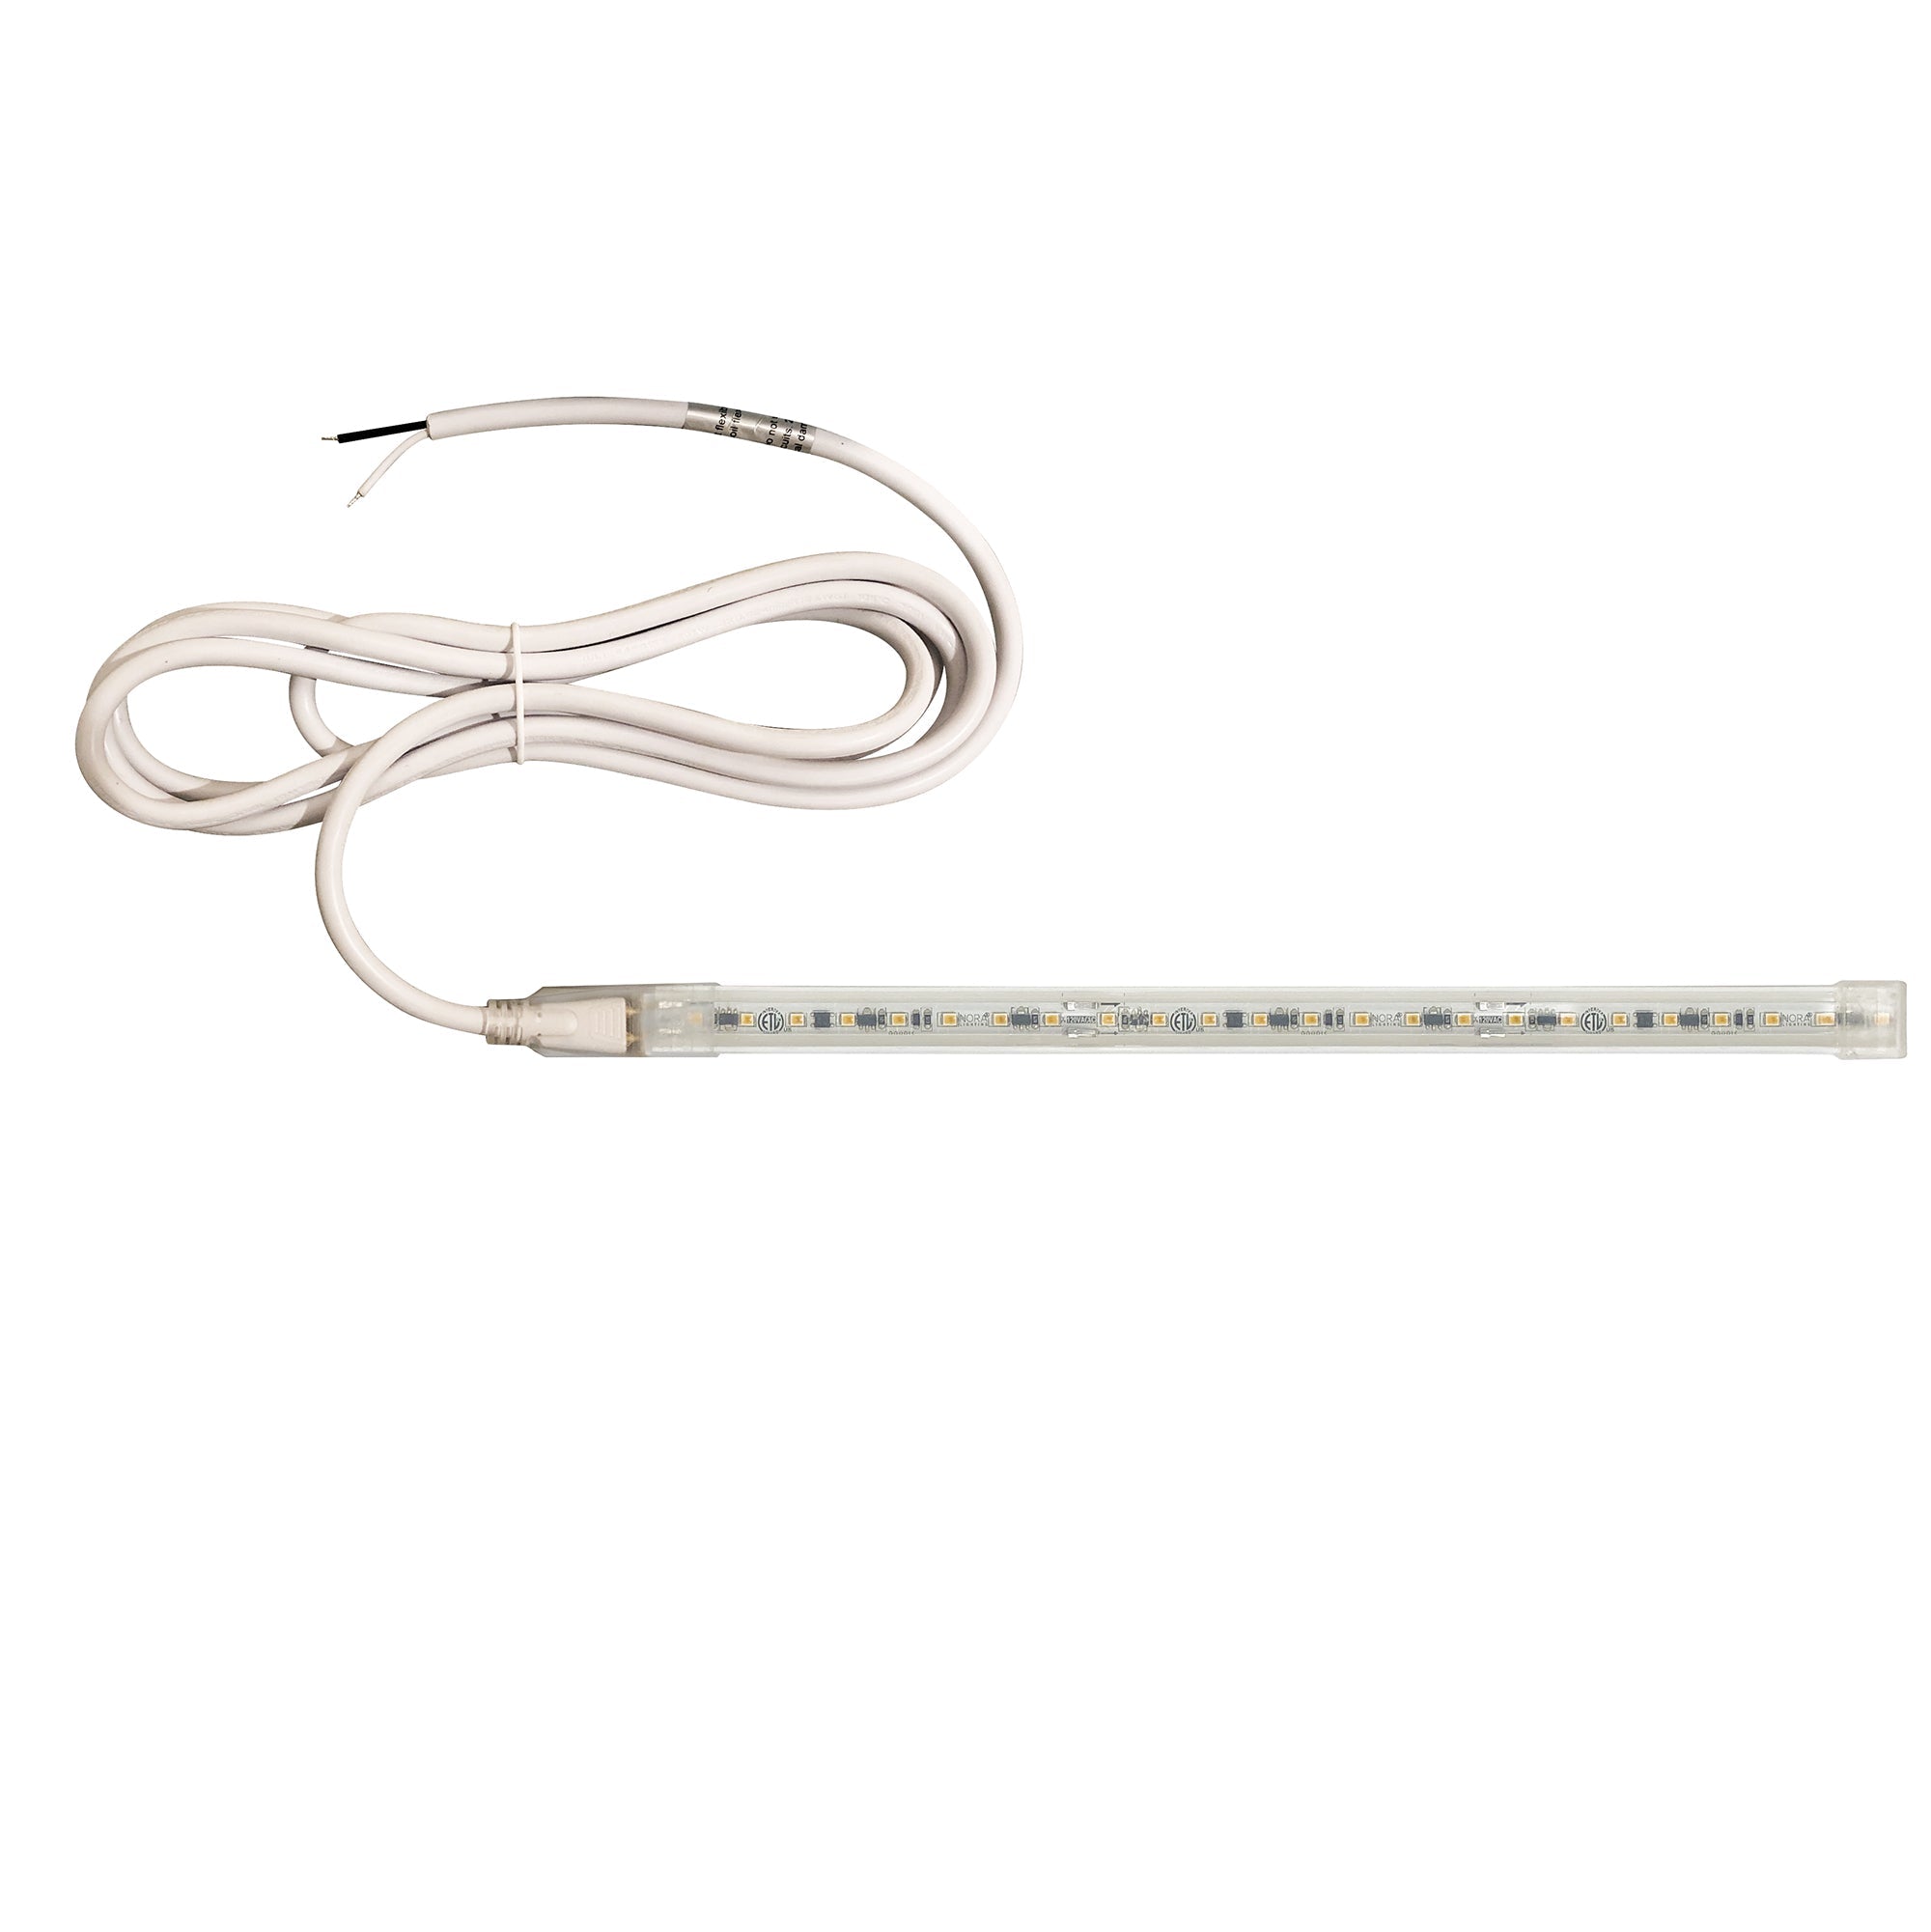 Nora Lighting NUTP13-W47-12-930/HW - Accent / Undercabinet - Custom Cut 47-ft 120V Continuous LED Tape Light, 330lm / 3.6W per foot, 3000K, w/ Mounting Clips and 8' Hardwired Power Cord